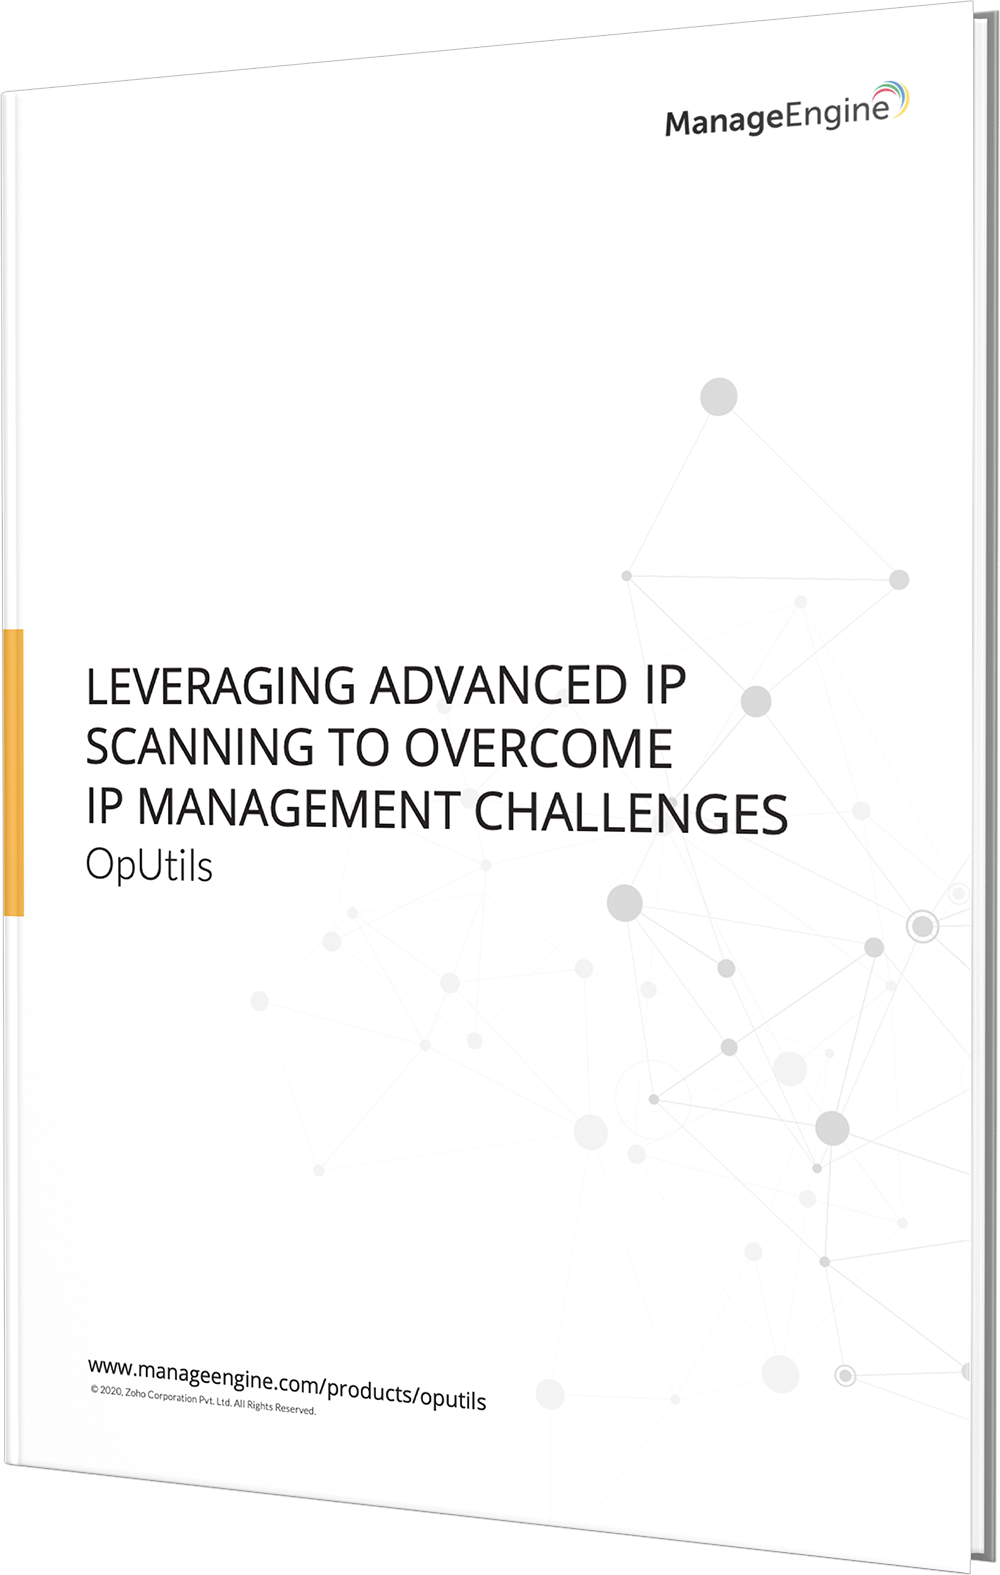 Leveraging advanced IP scanning to overcome IP management challenges